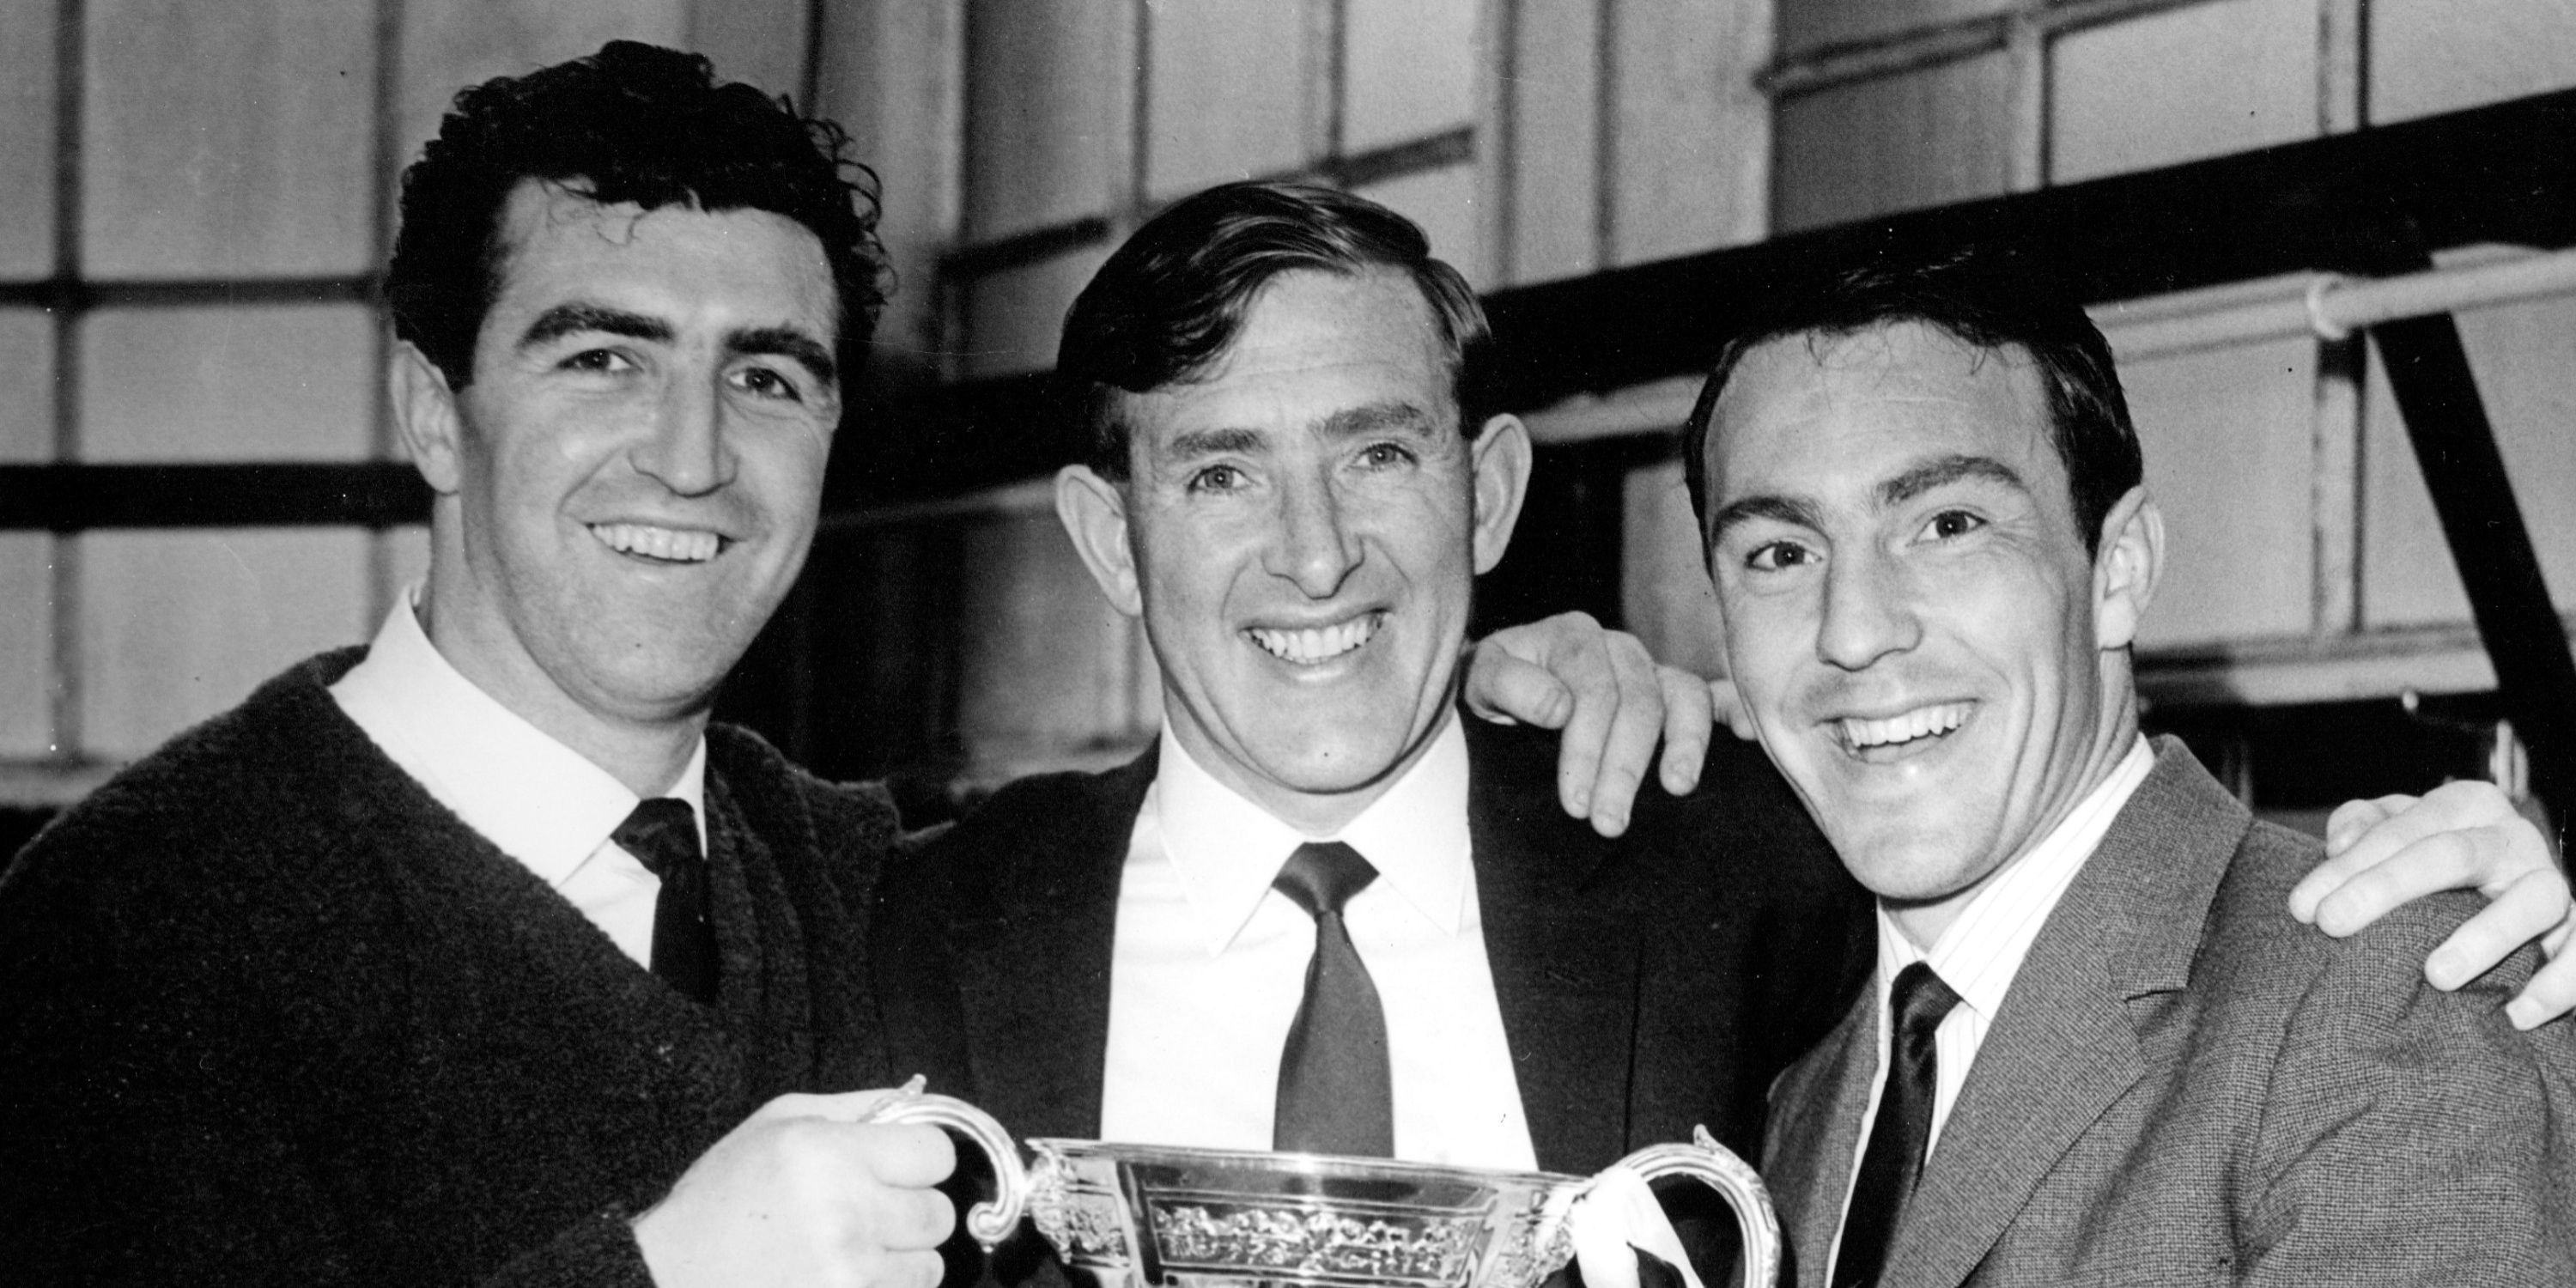 Bobby Smith lifting the cup with Danny Blanchflower and Jimmy Greaves